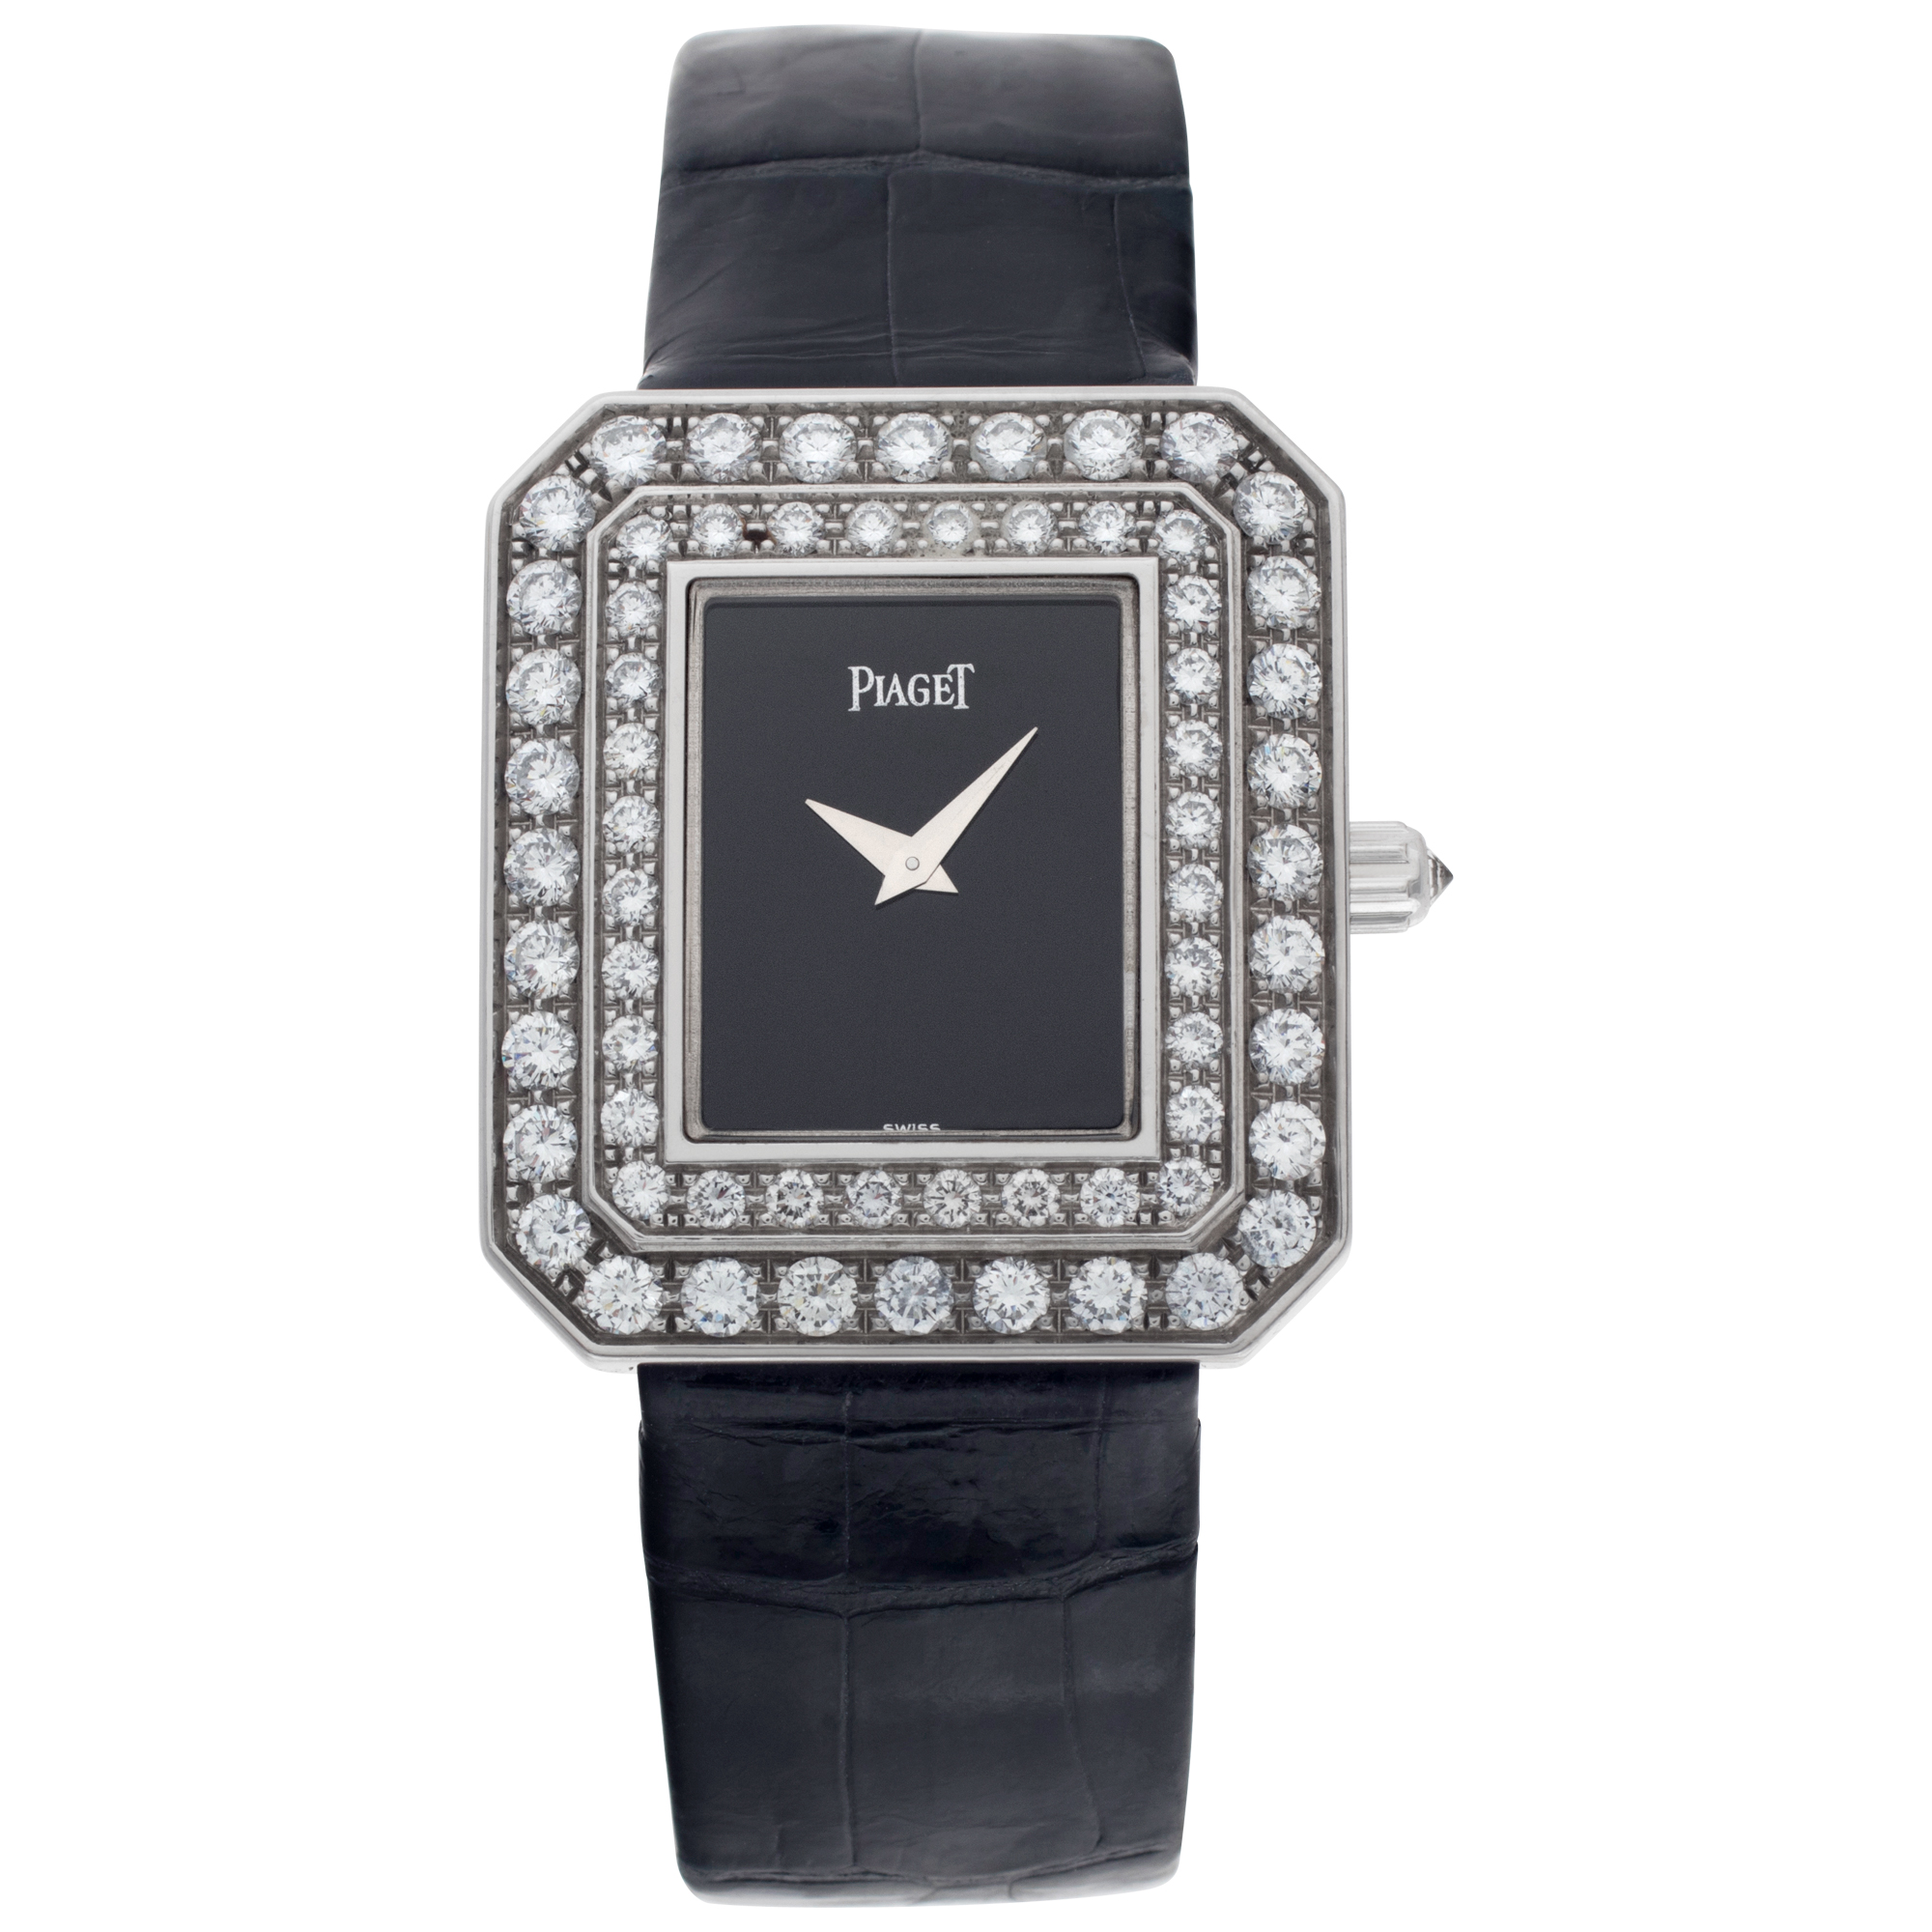 Piaget Classic 27mm 81165 image 1